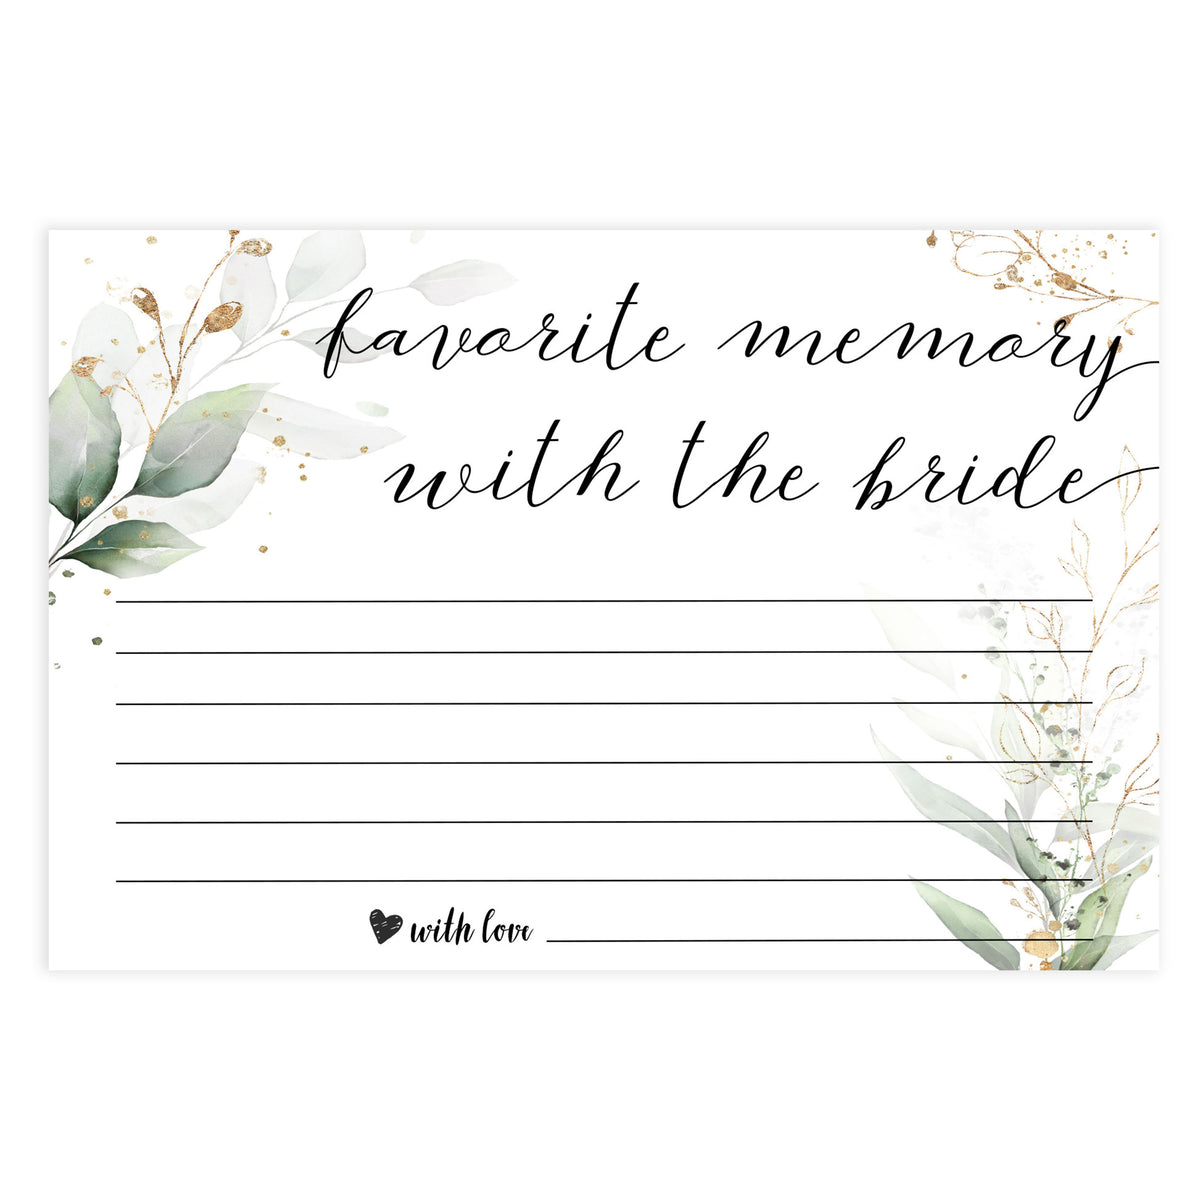 favorite memory with the bride, memory of the bride,  Printable bridal shower games, greenery bridal shower, gold leaf bridal shower games, fun bridal shower games, bridal shower game ideas, greenery bridal shower